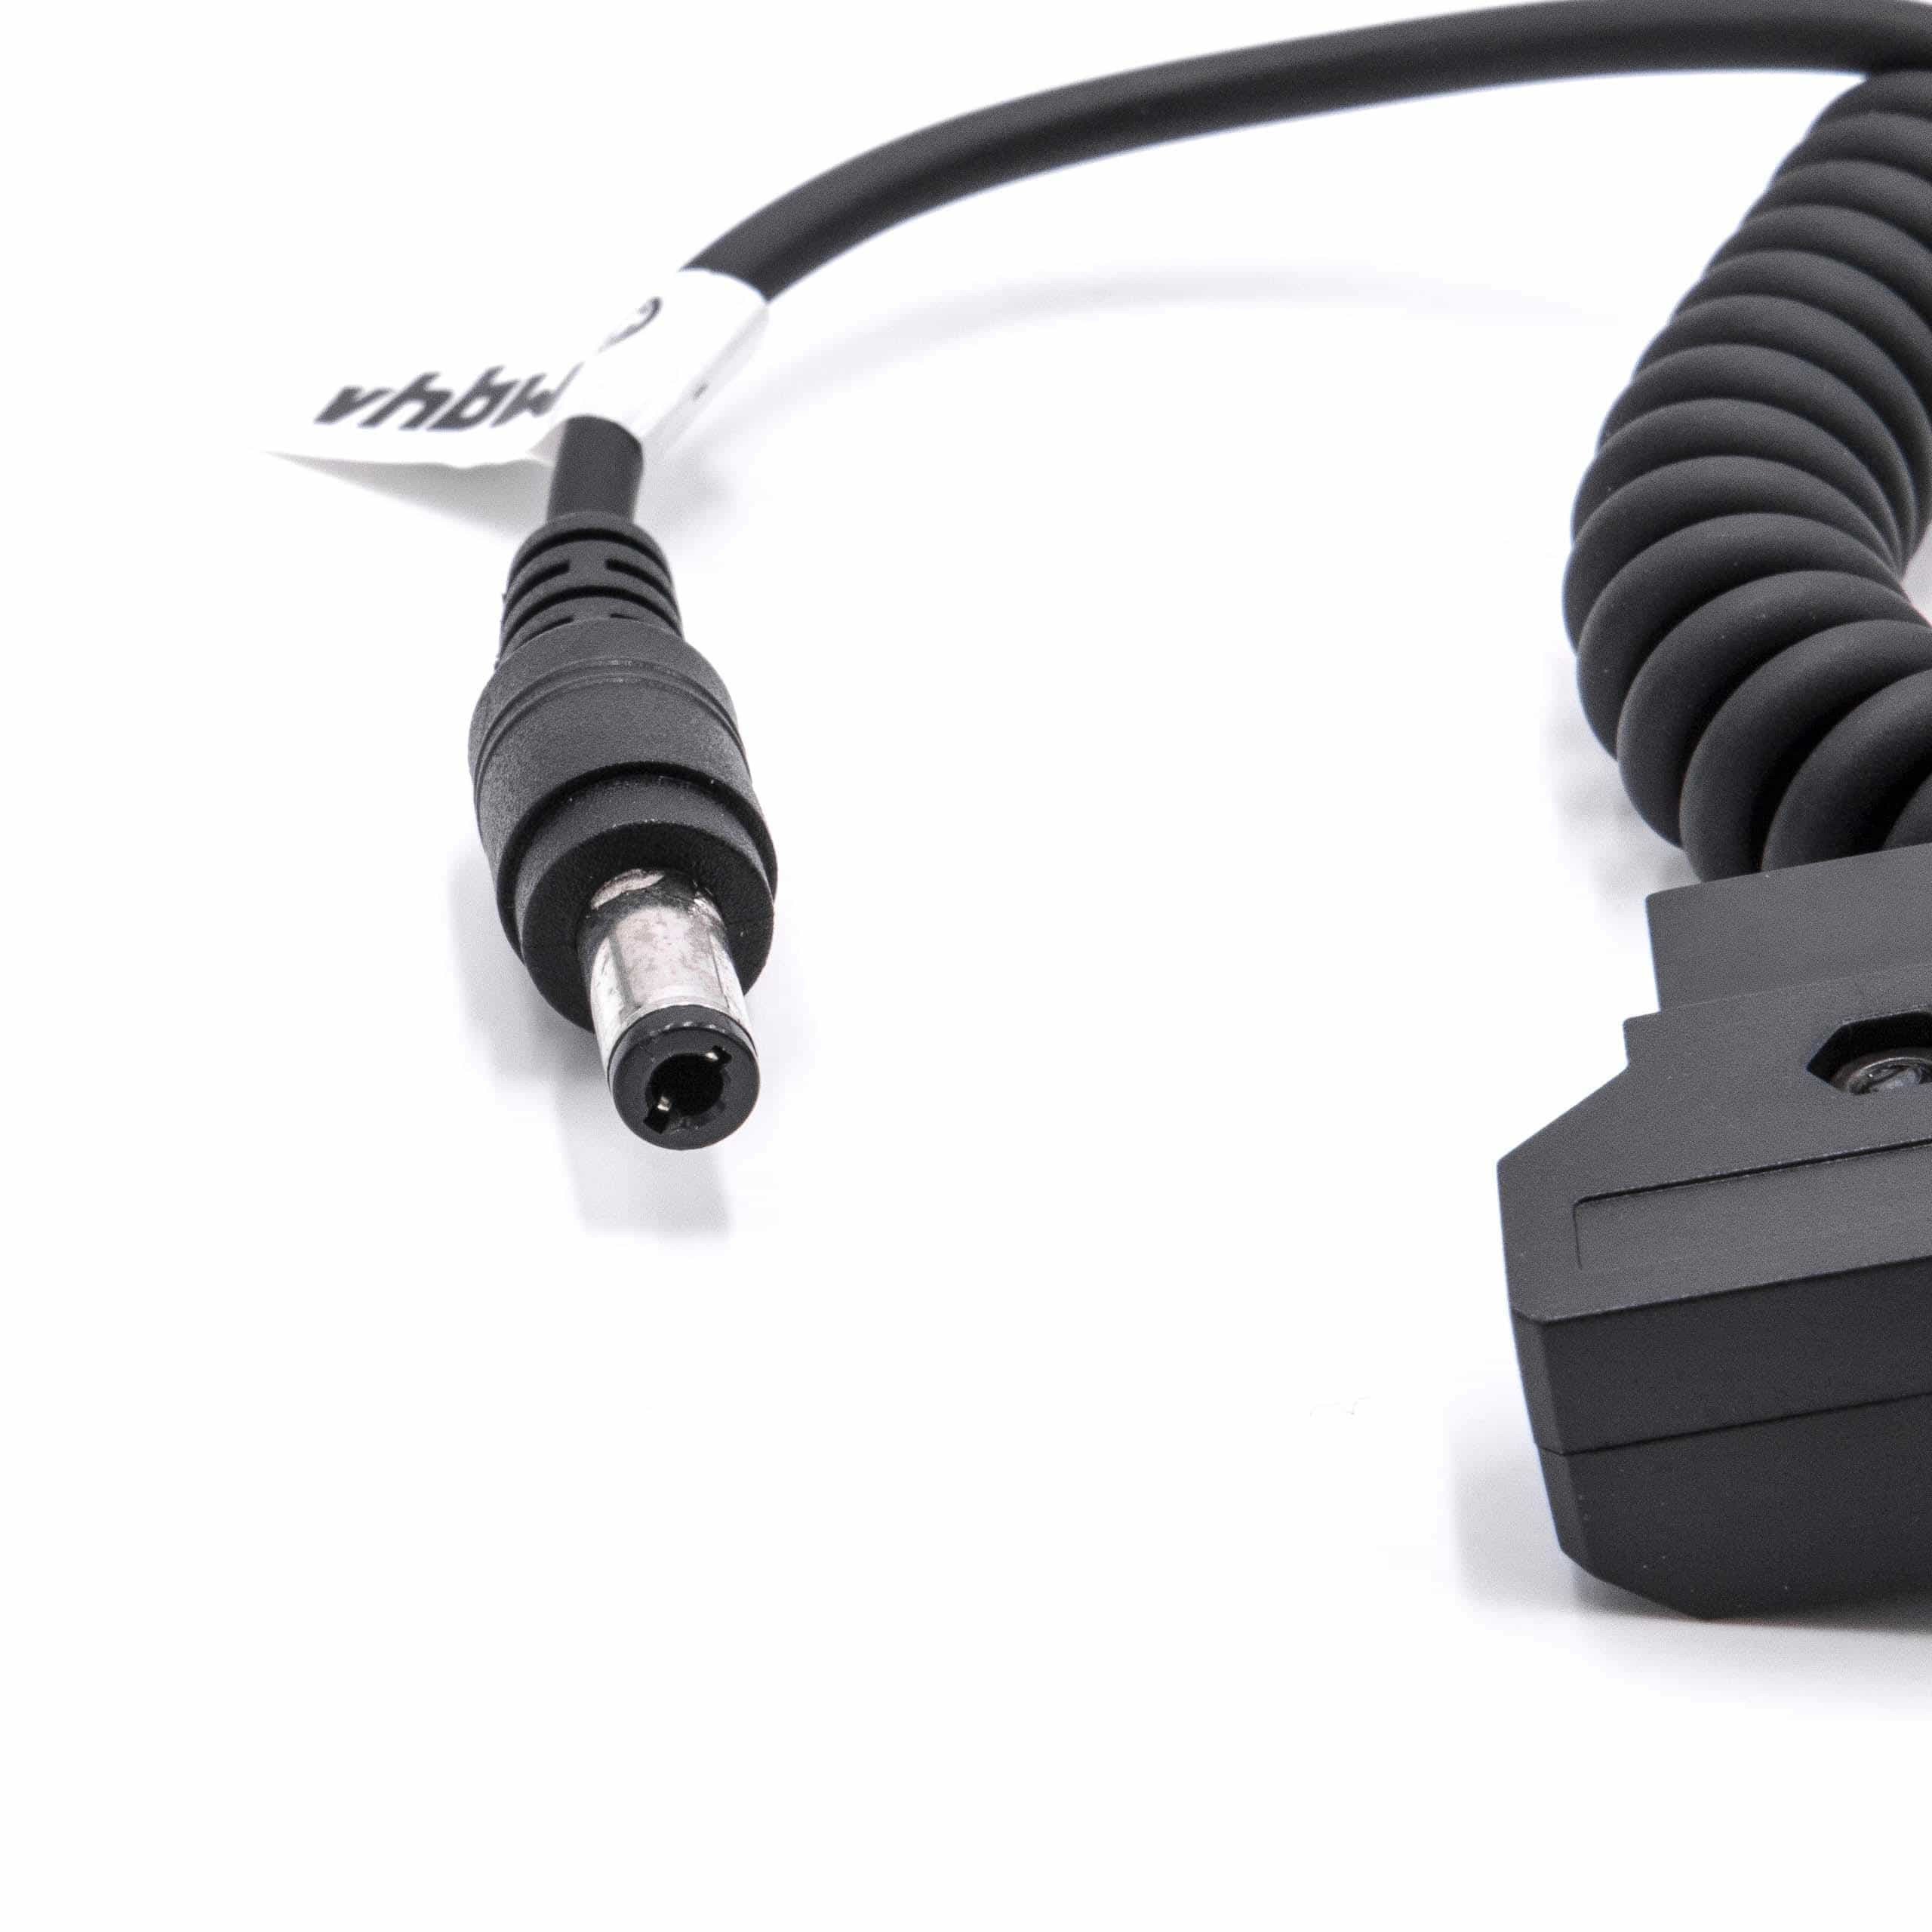 Adapter Cable D-Tap (male) to LED Power Supply suitable for Anton Bauer D-Tap, Dionic Camera - Black